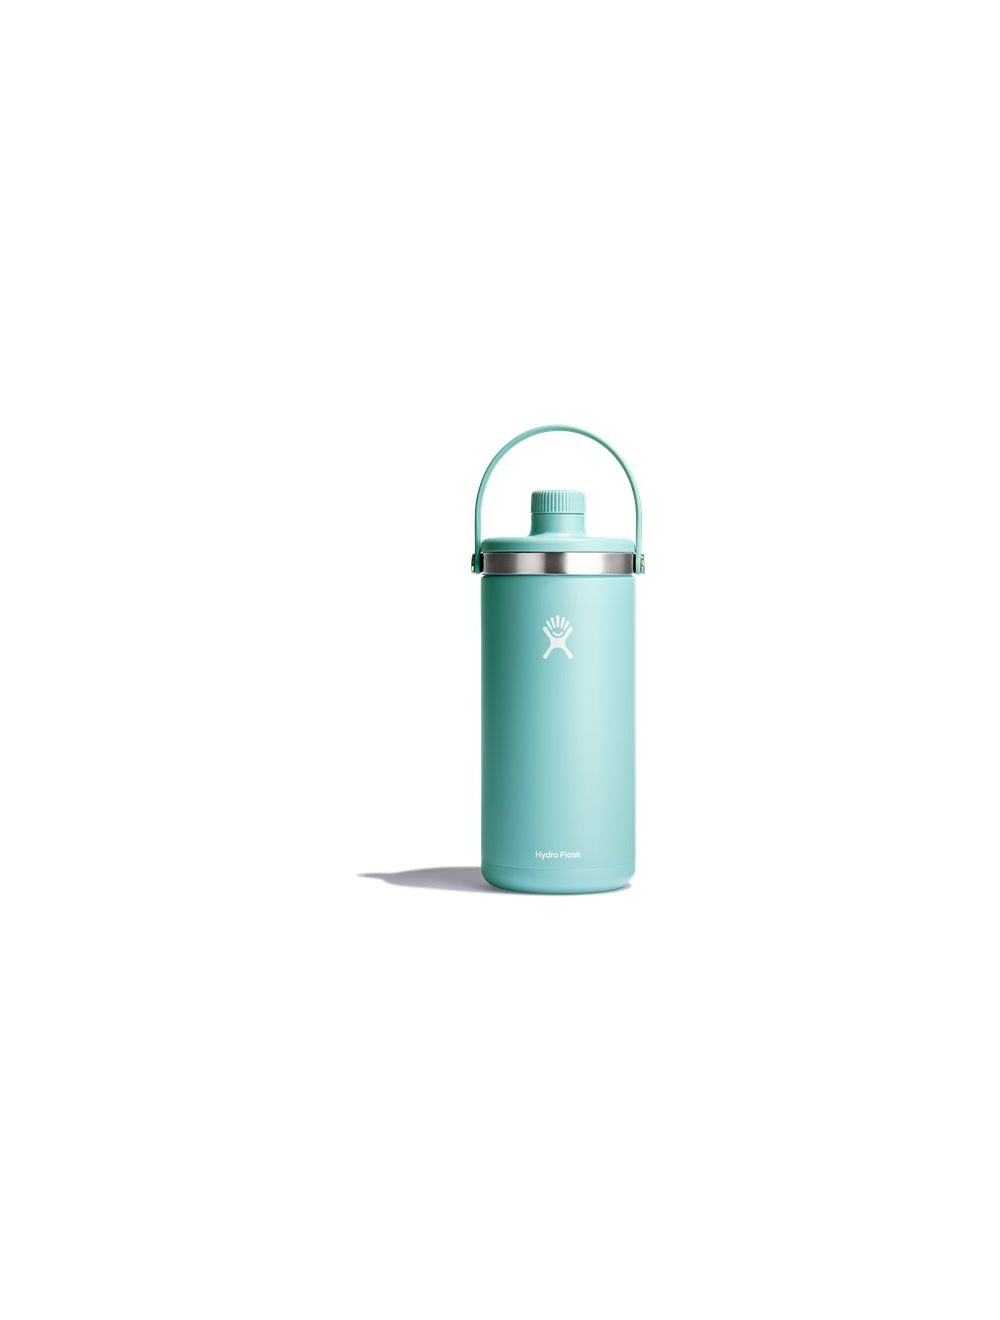 Oasis Insulated Water Bottle - 128oz